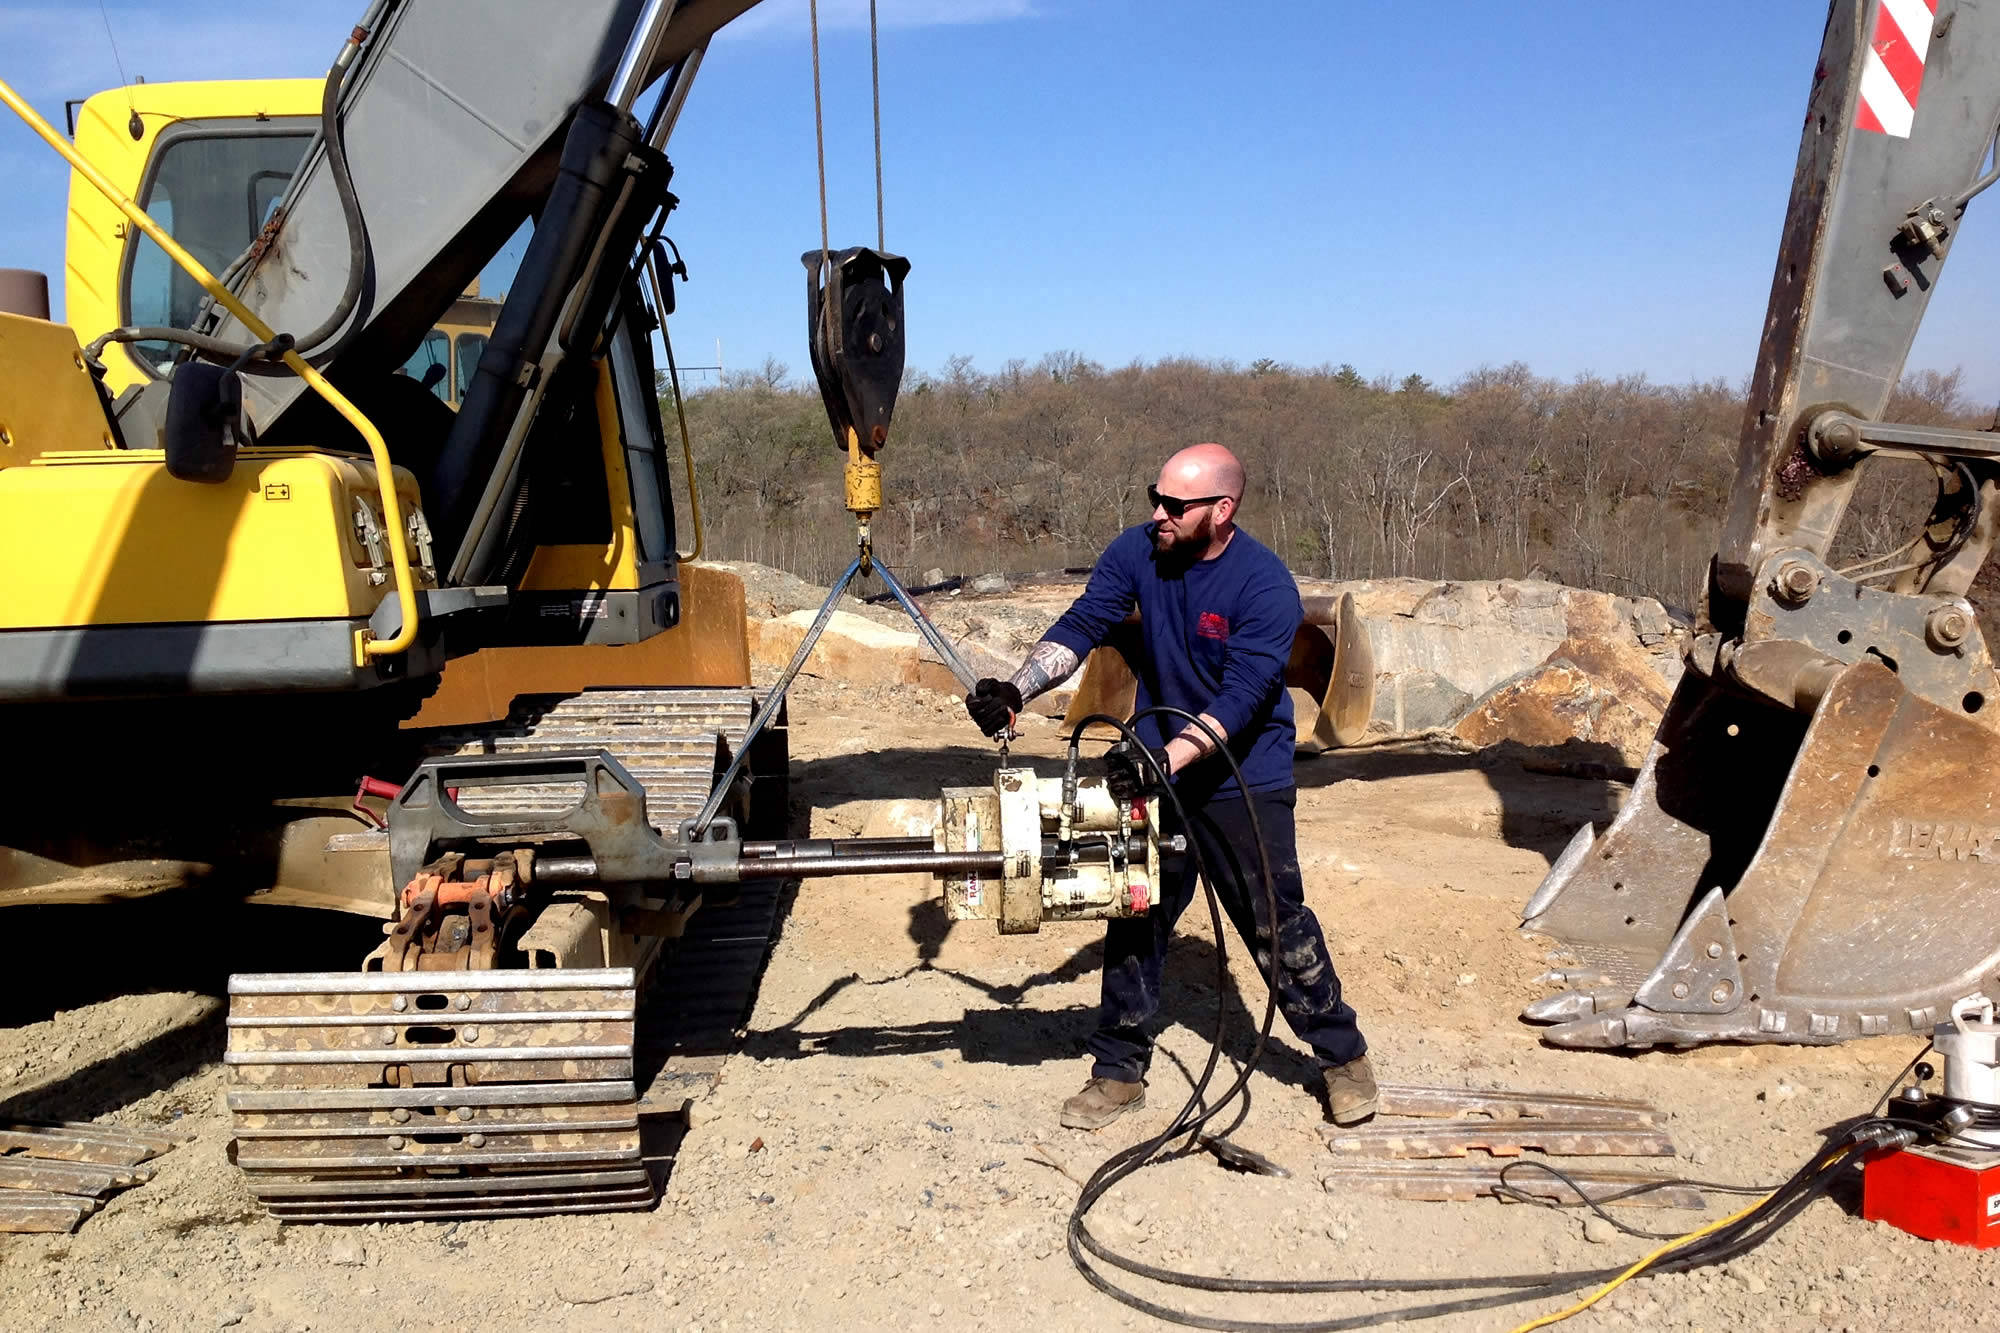 D&D Equipment Repair - Heavy equipment and in-house hydraulic cylinder rebuilds and repairs in Woburn, MA  Call us - 781.537.6949